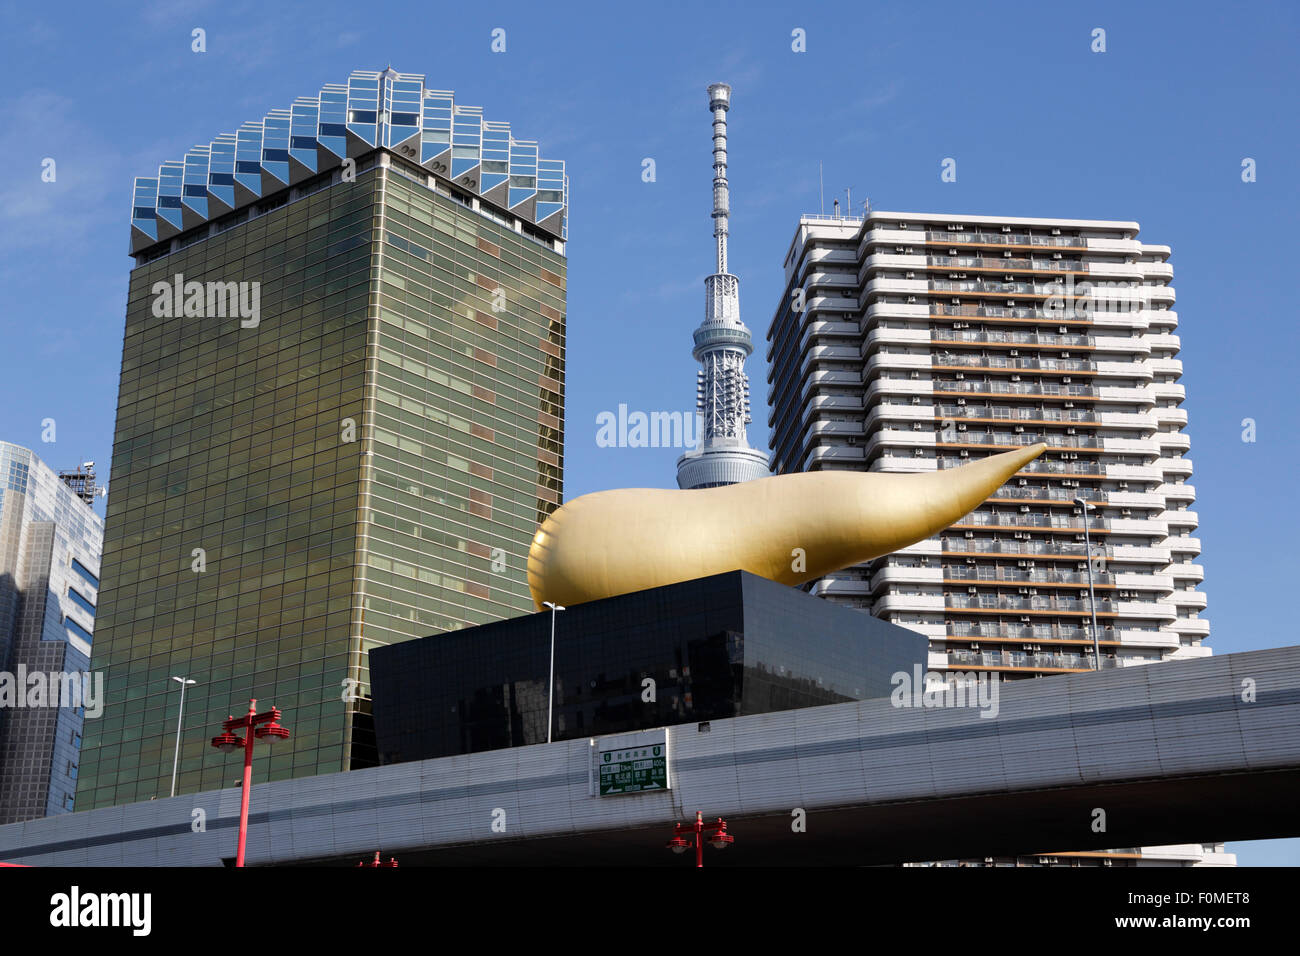 Skytree Tower and modern architecture, Sumida, Tokyo, Japan, Asia Stock Photo